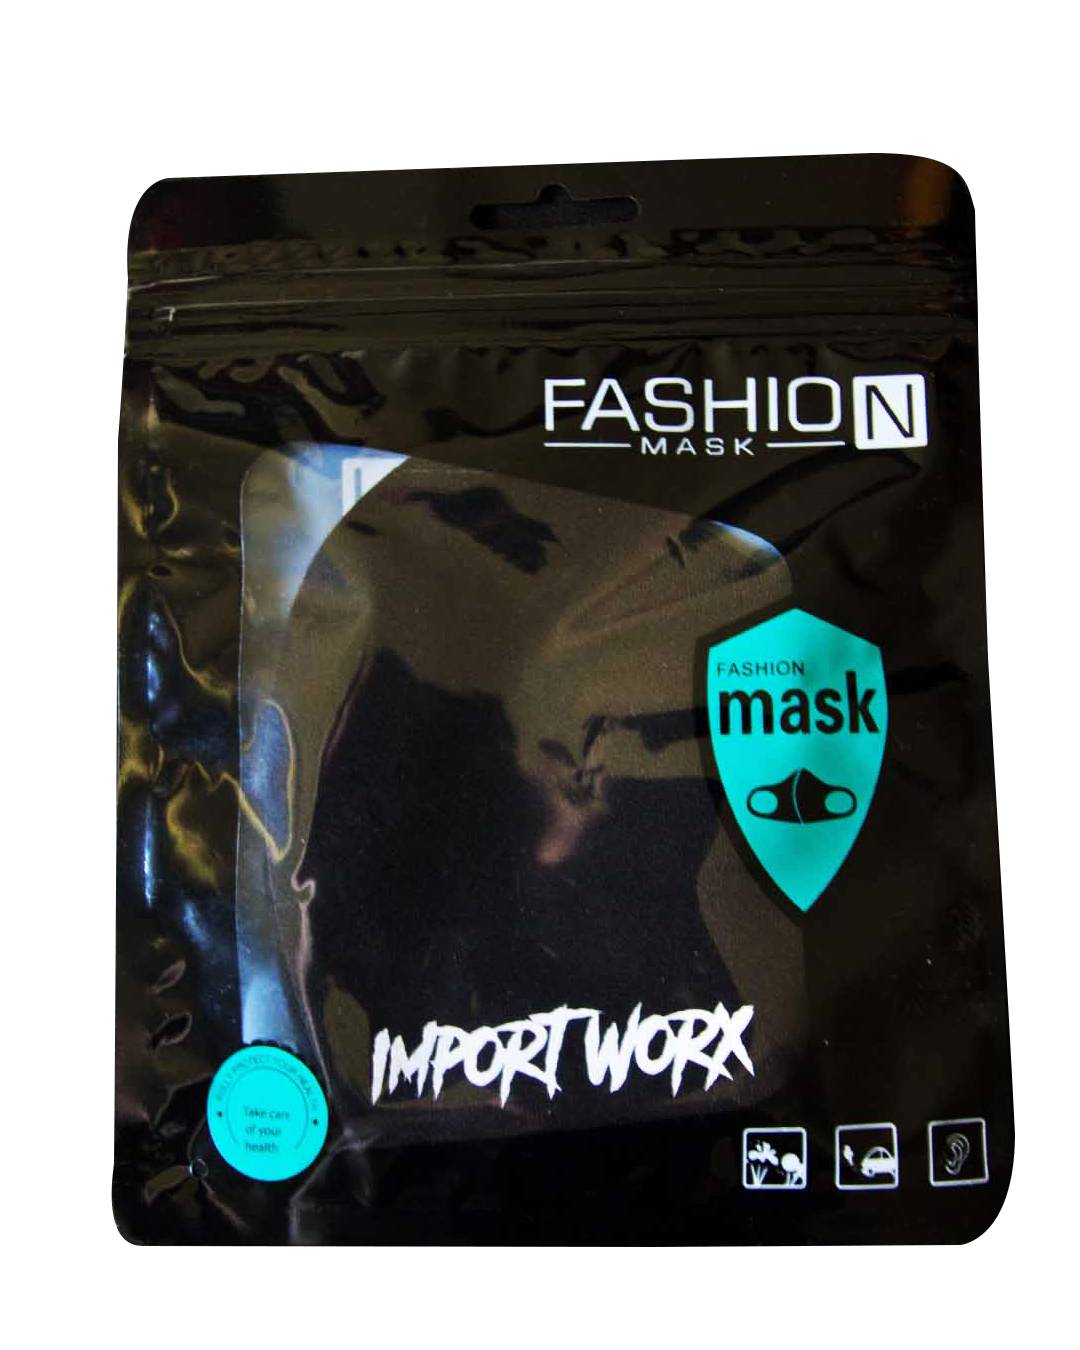 ImportWorx Face Mask Covers